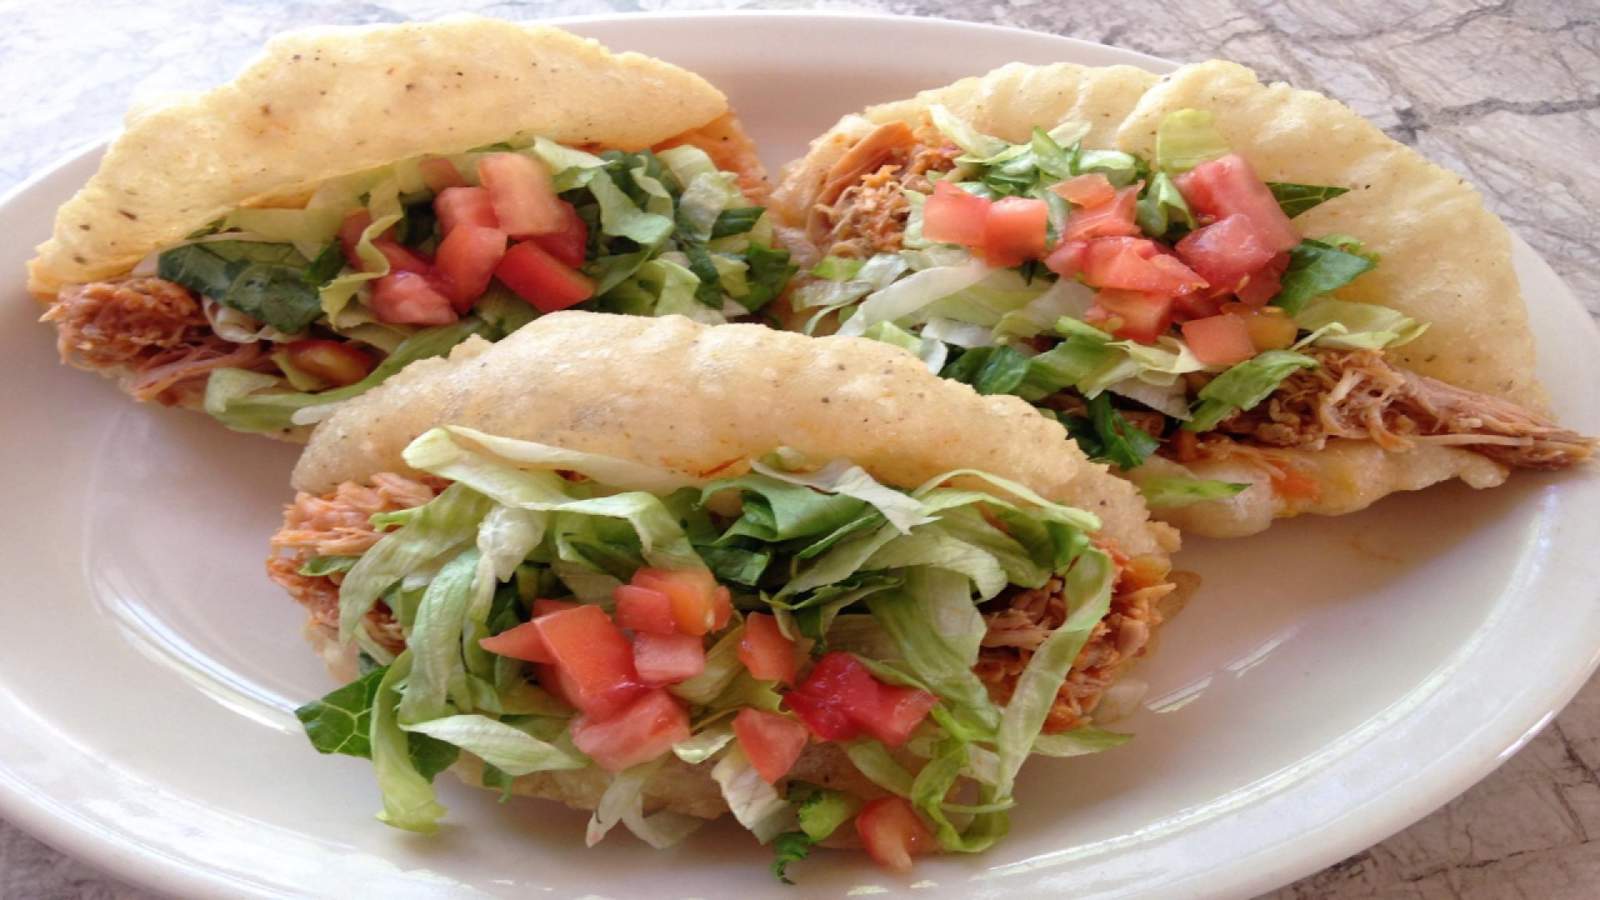 Evolution of tacos in Texas, San Antonio and what trends are next